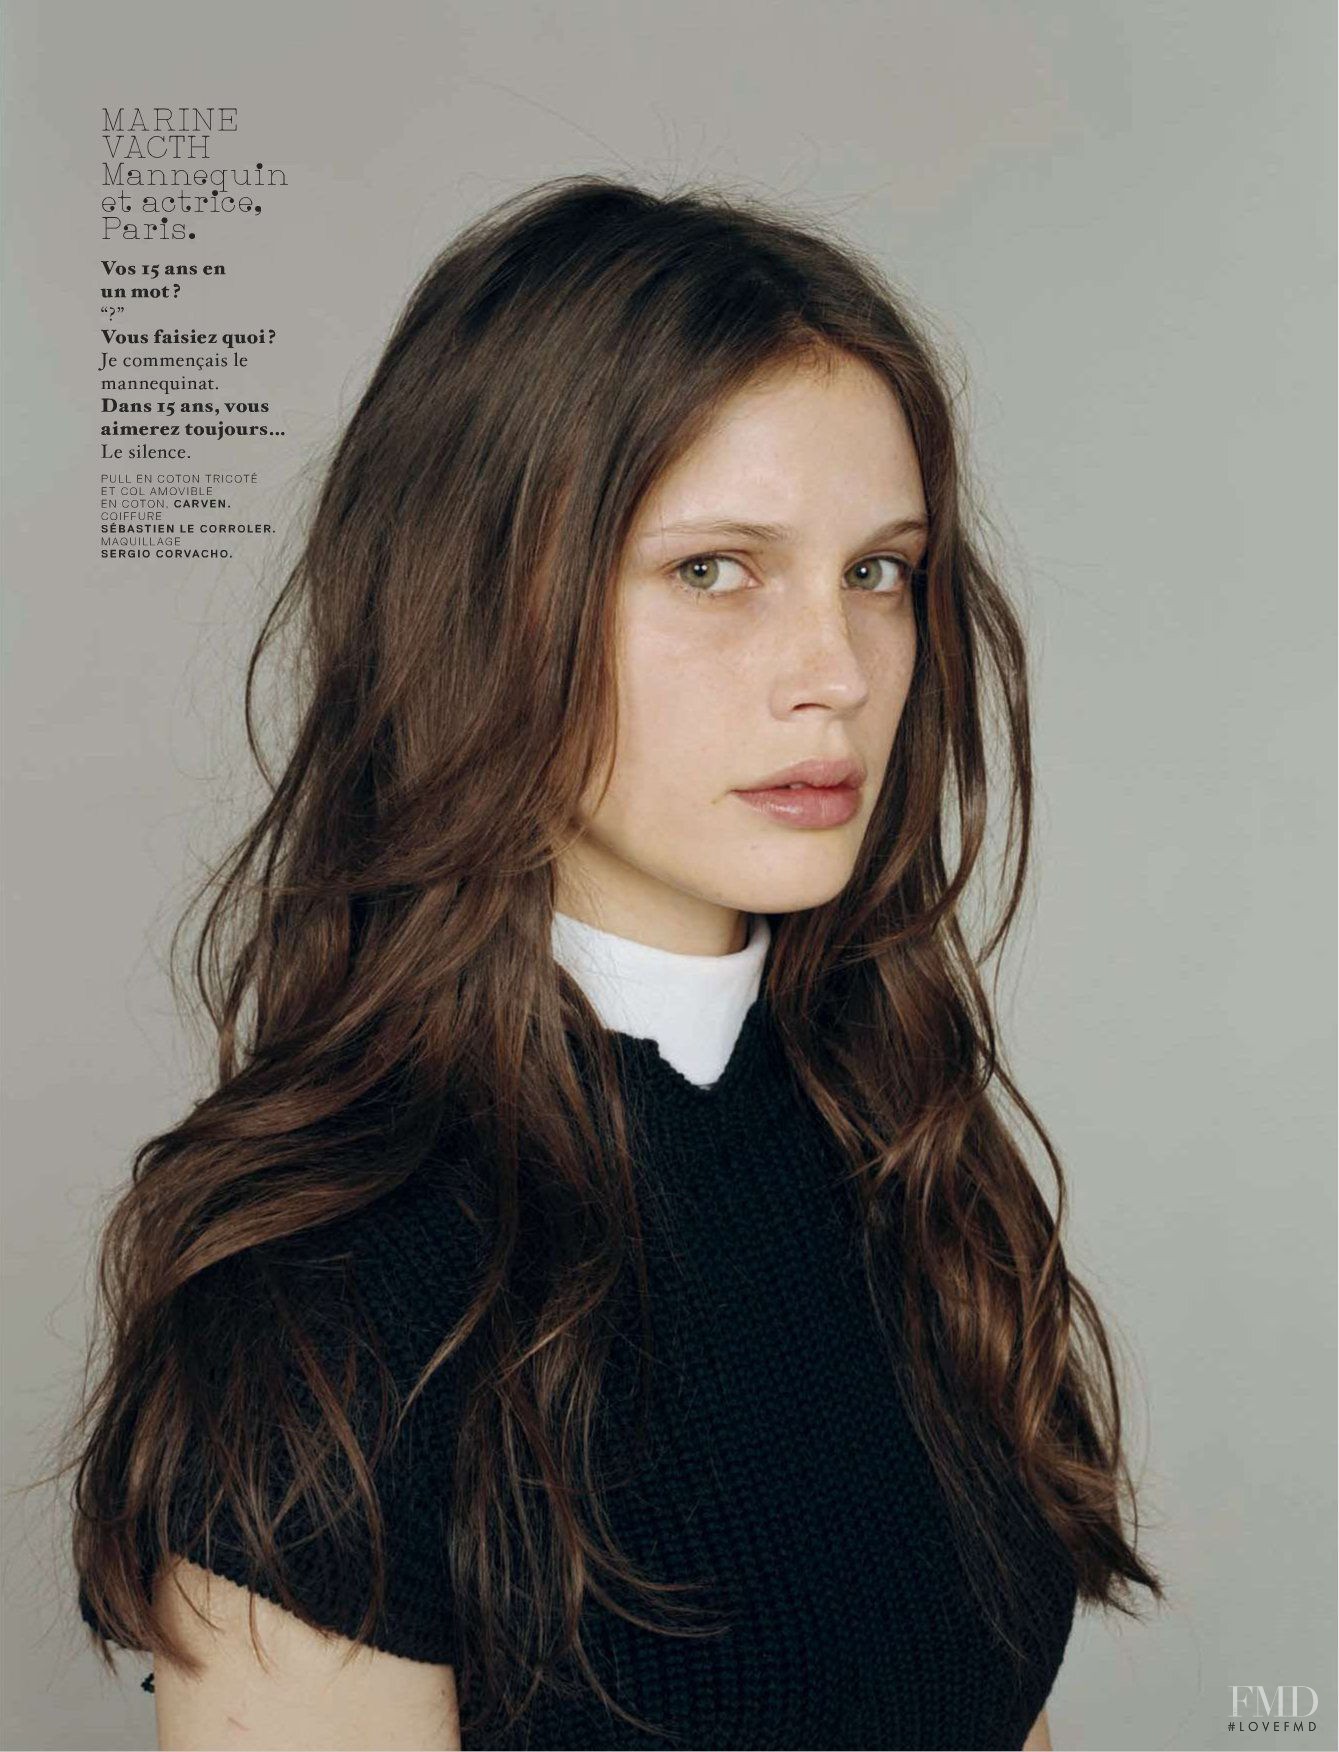 Yearbook in Jalouse with Marine Vacth - (ID:31644) - Fashion Editorial ...